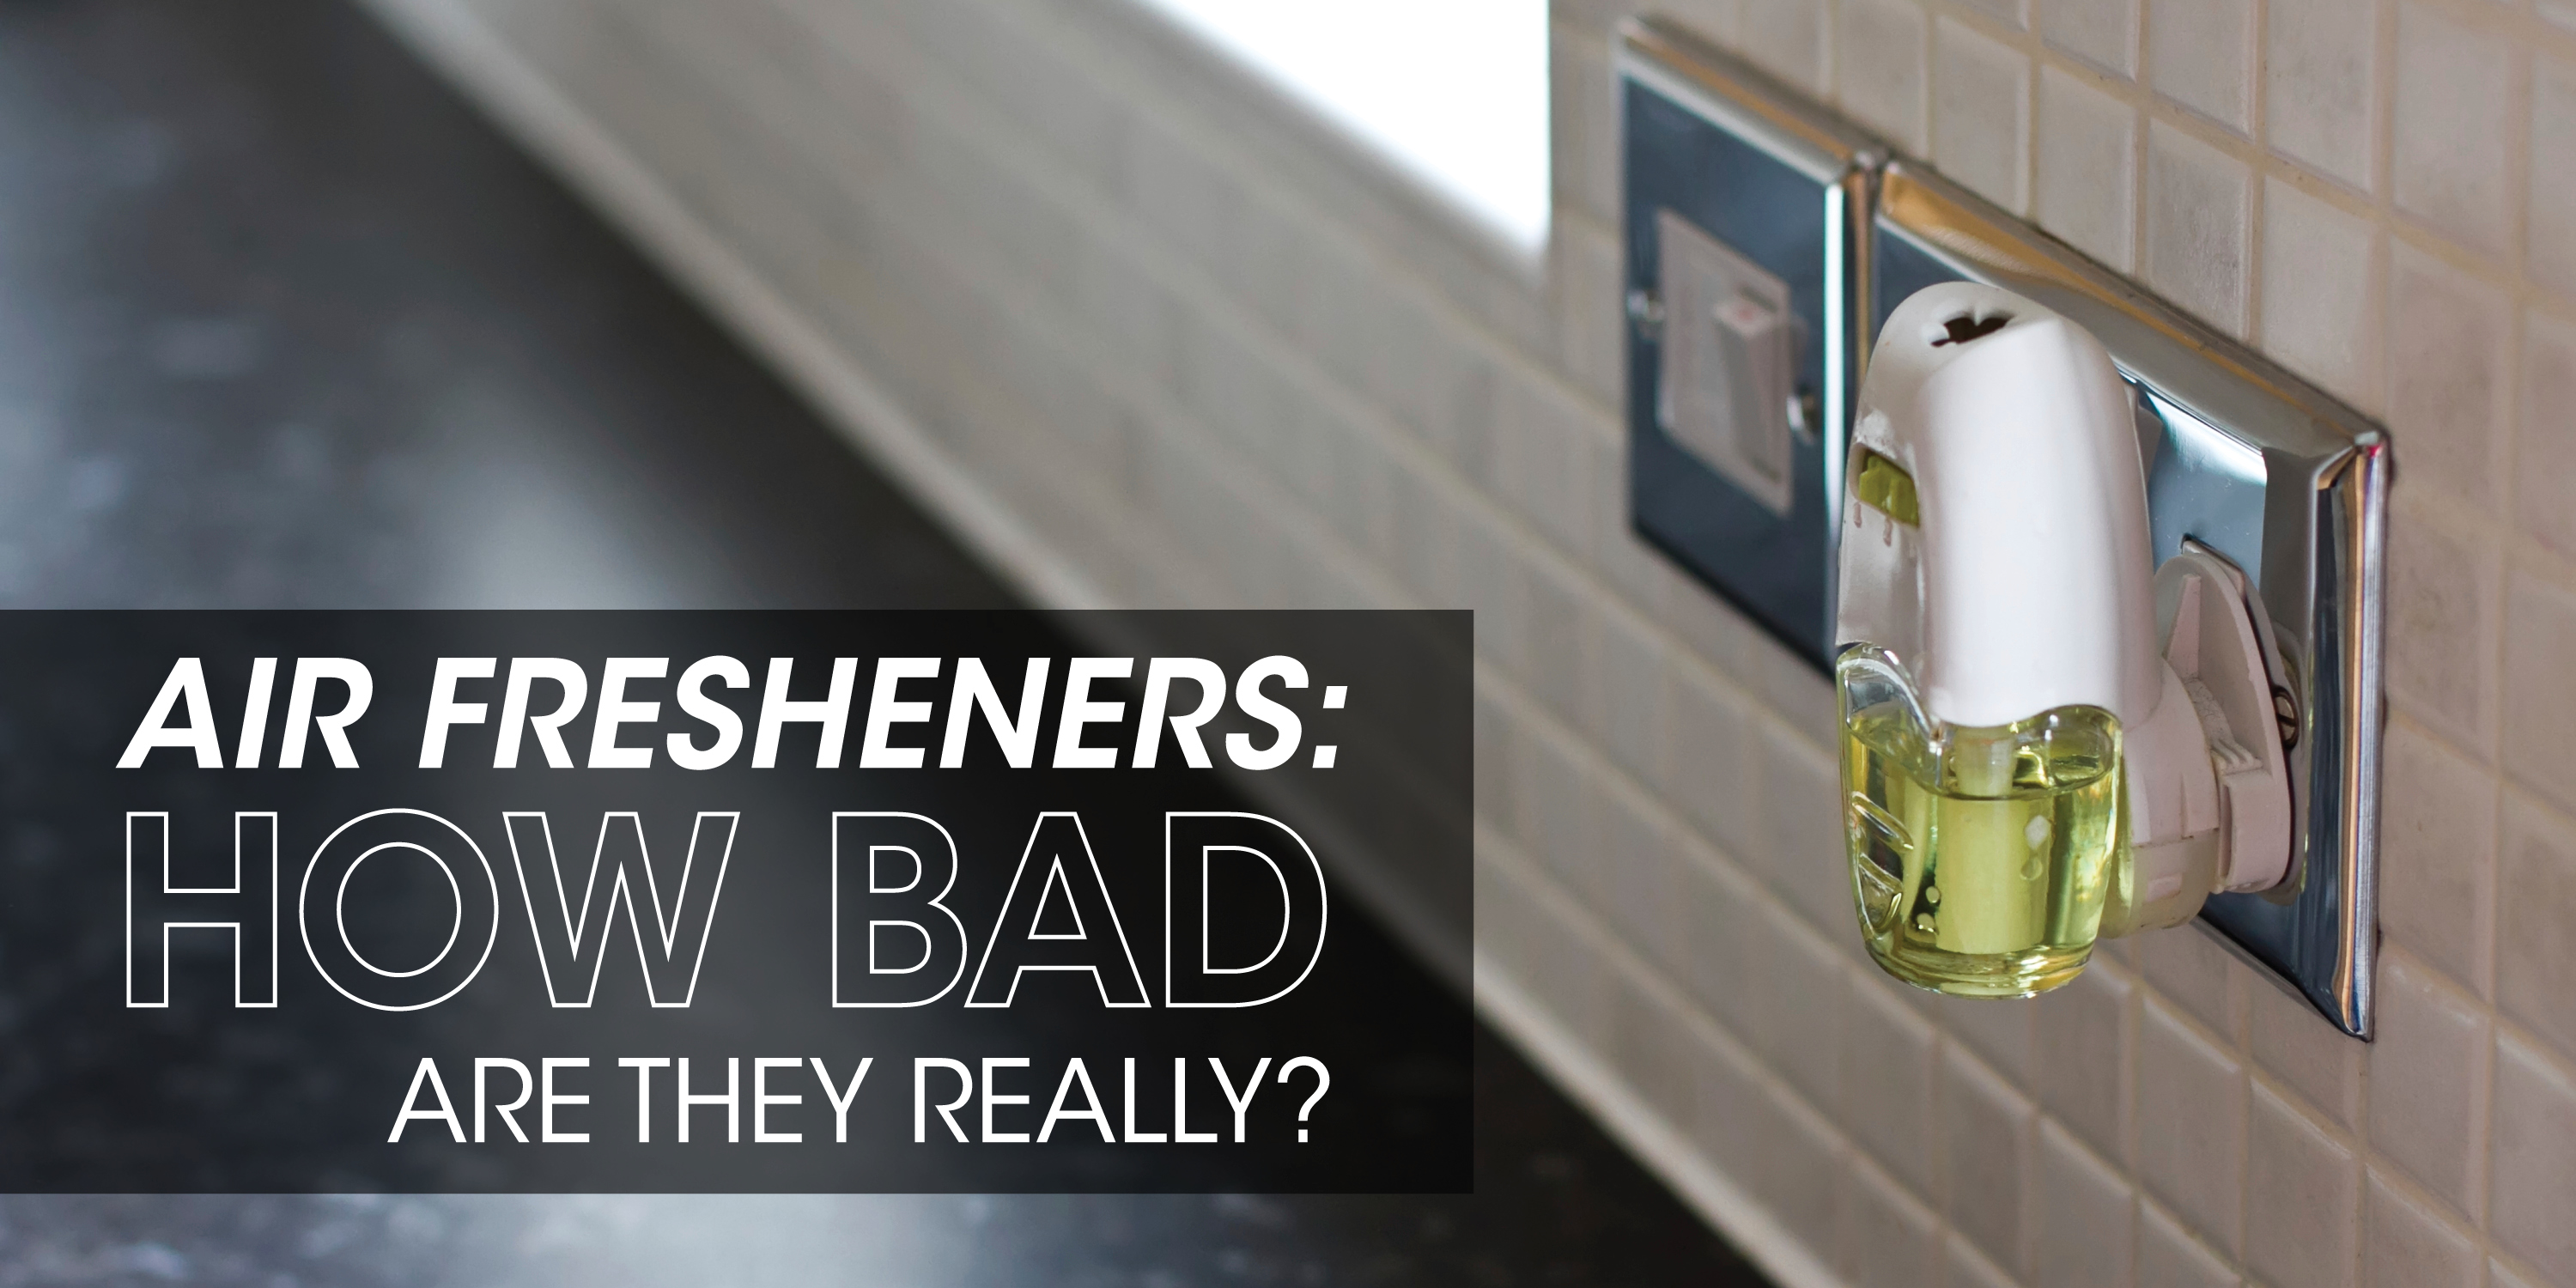 Air freshener with text: "air fresheners: how bad are they really?"